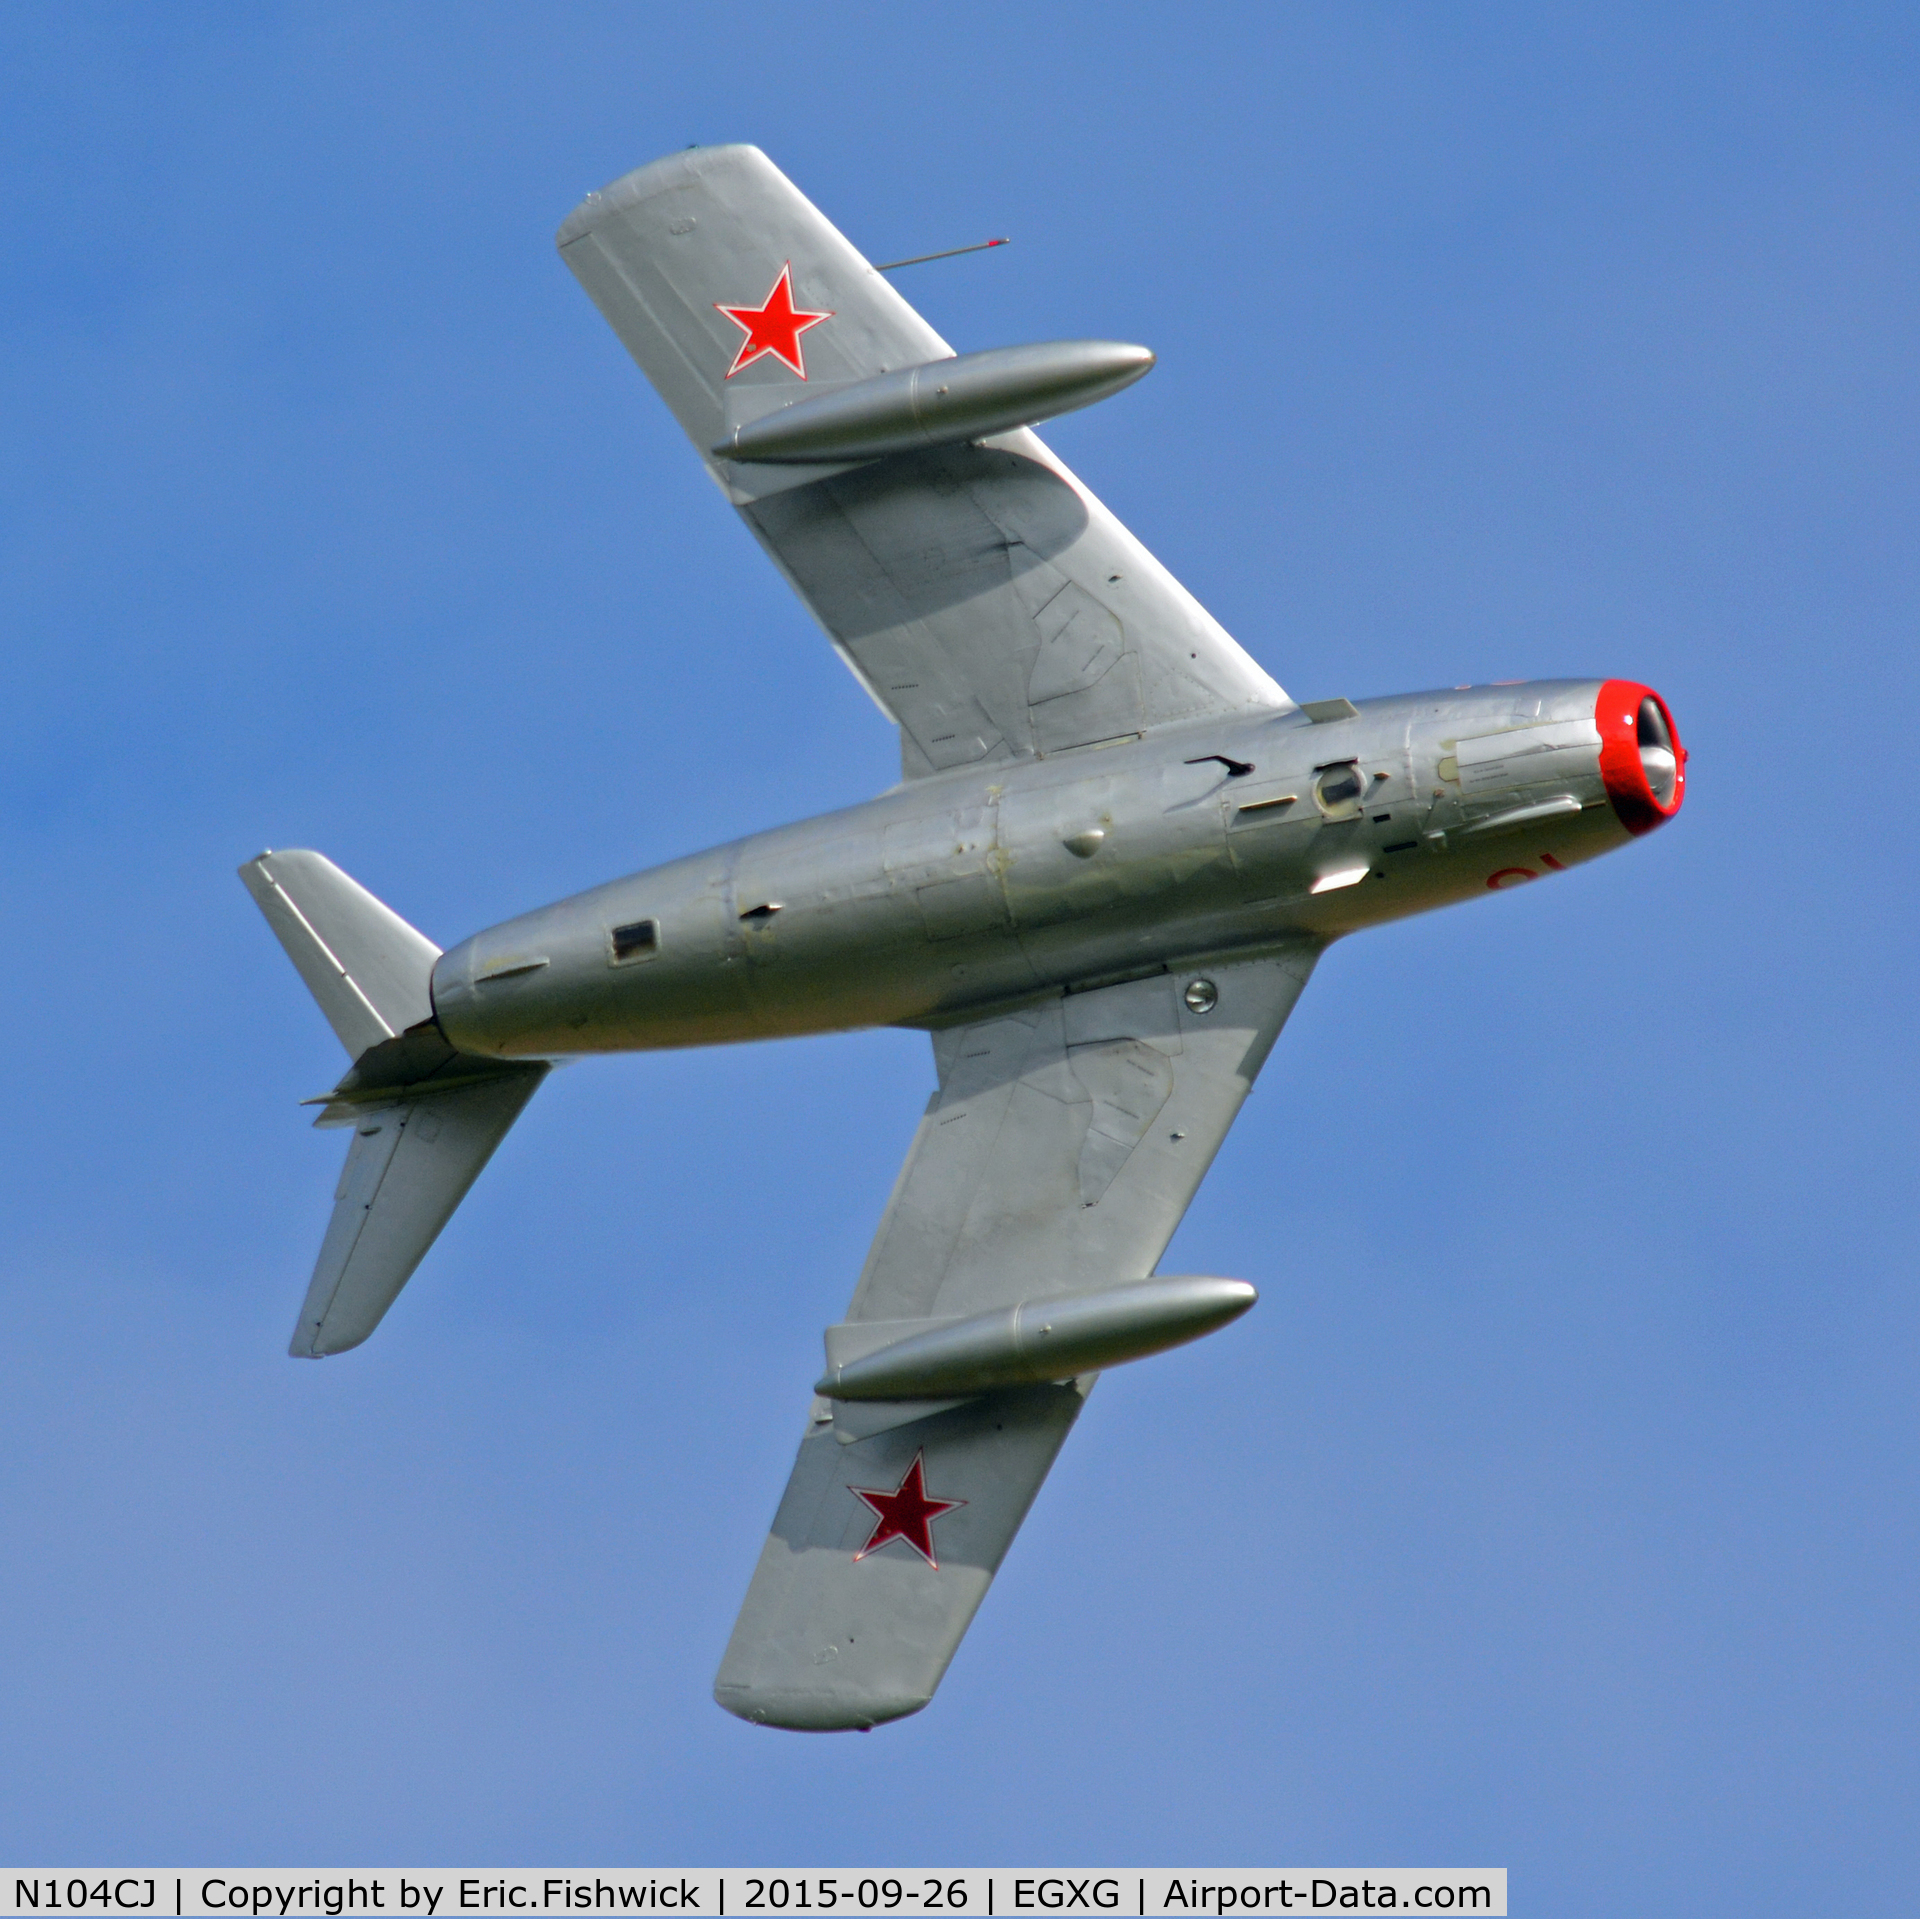 N104CJ, 1952 PZL-Mielec SBLim-2 (MiG-15UTI) C/N 1A01004, 44. N104CJ in display mode at The Yorkshire Air Show, Church Fenton, Sept. 2015.